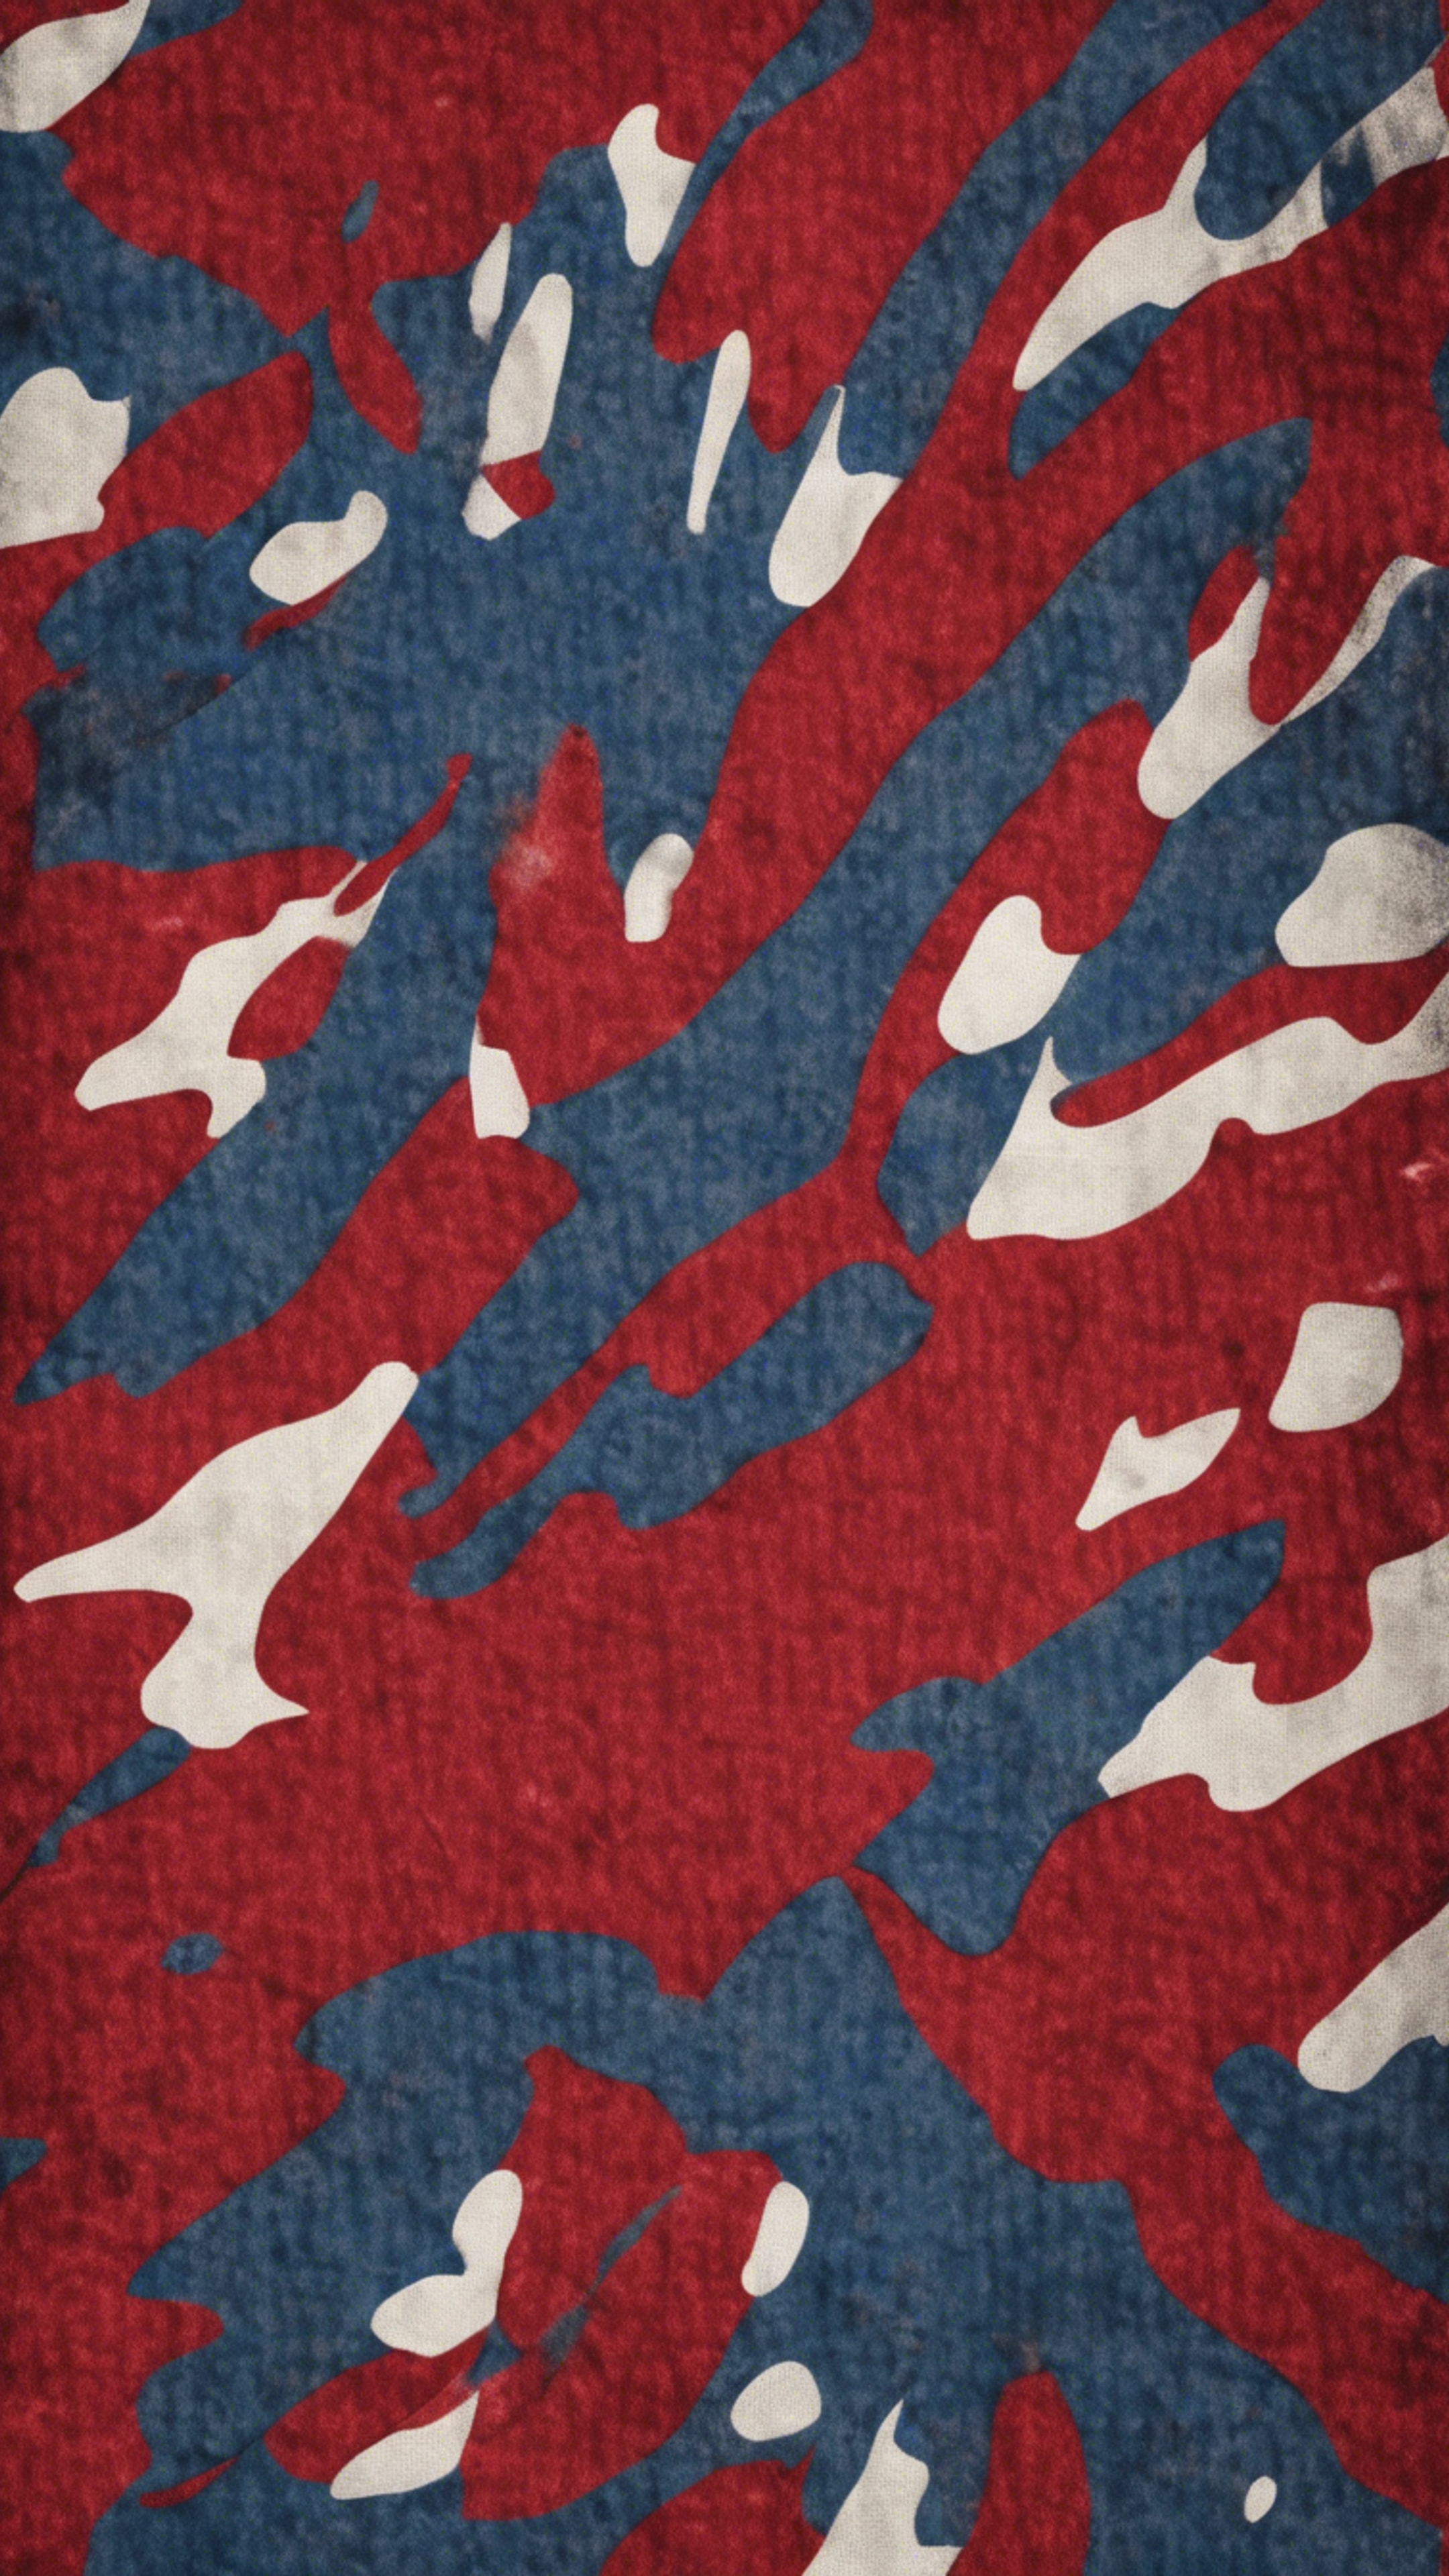 Red and blue camouflage pattern used in navy uniforms. Tapeta[01ccfb252ca748fab57f]